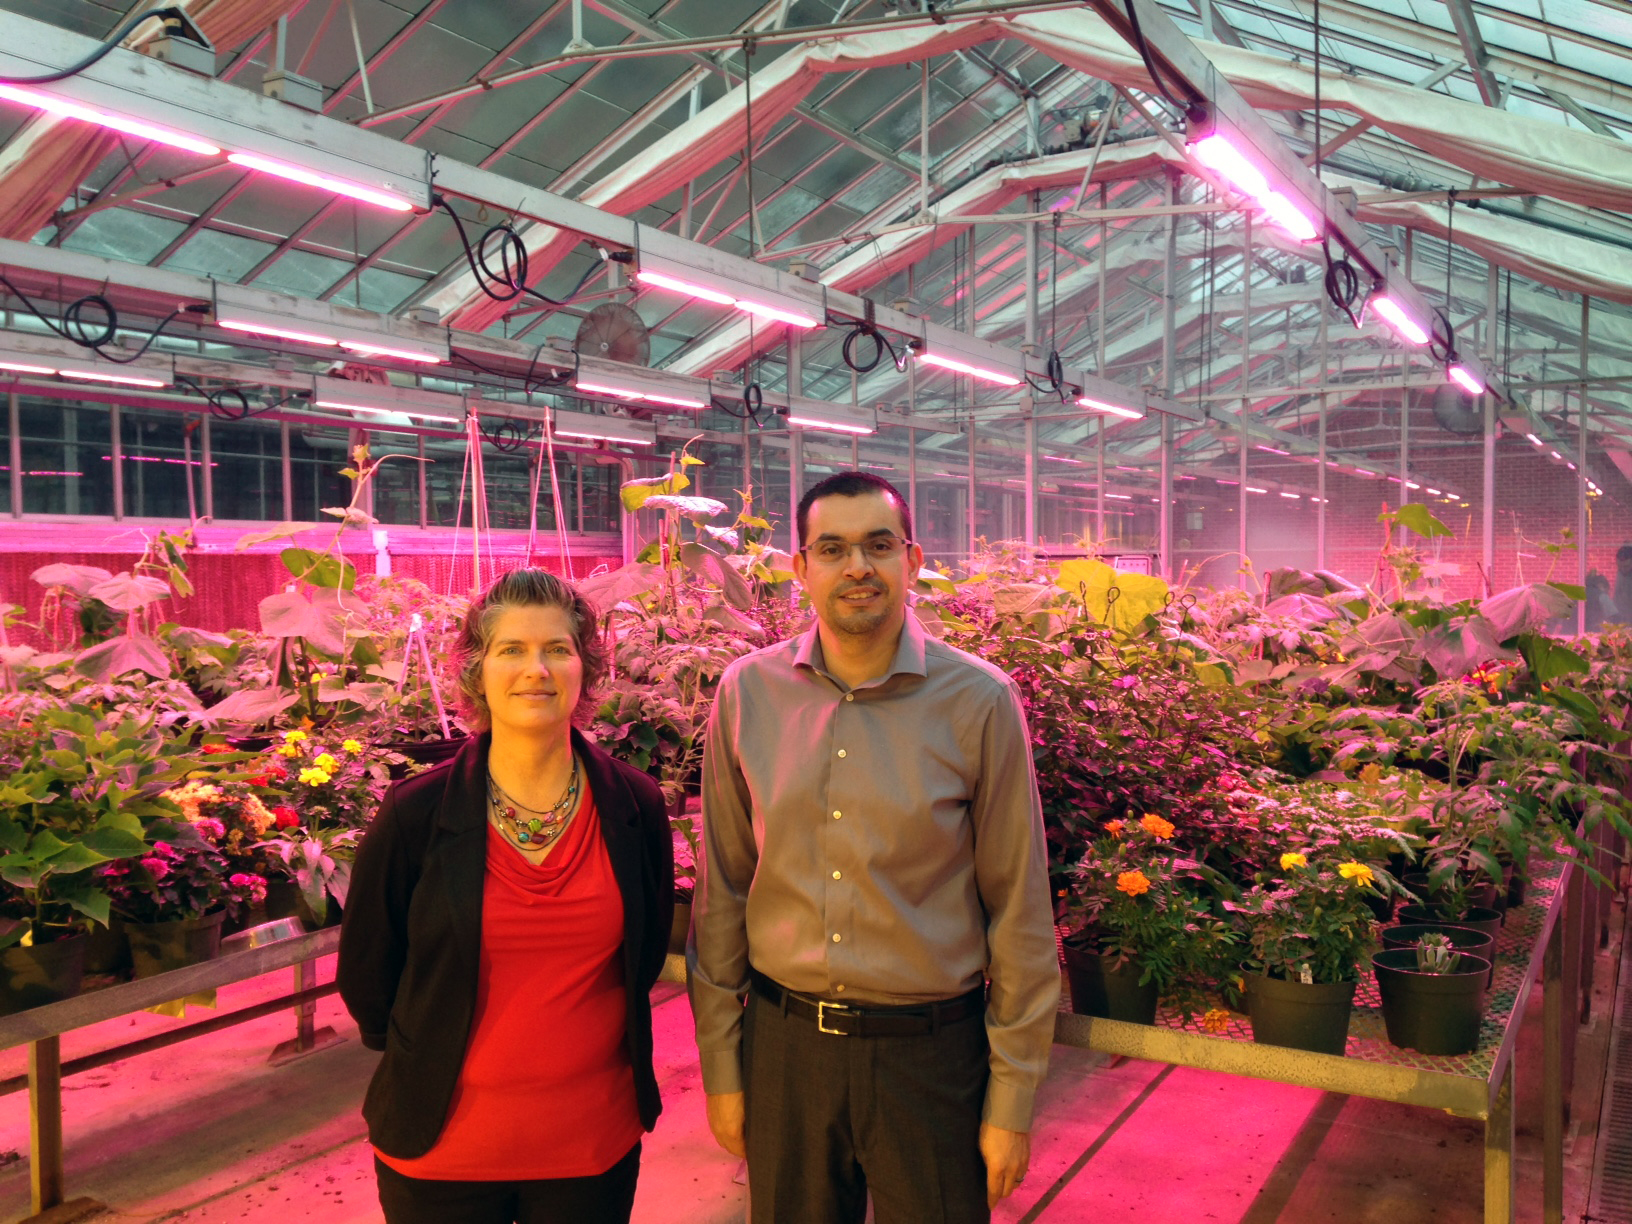 Department of Horticulture faculty members Kristin Getter and Roberto Lopez in one of the teaching greenhouses at MSU.